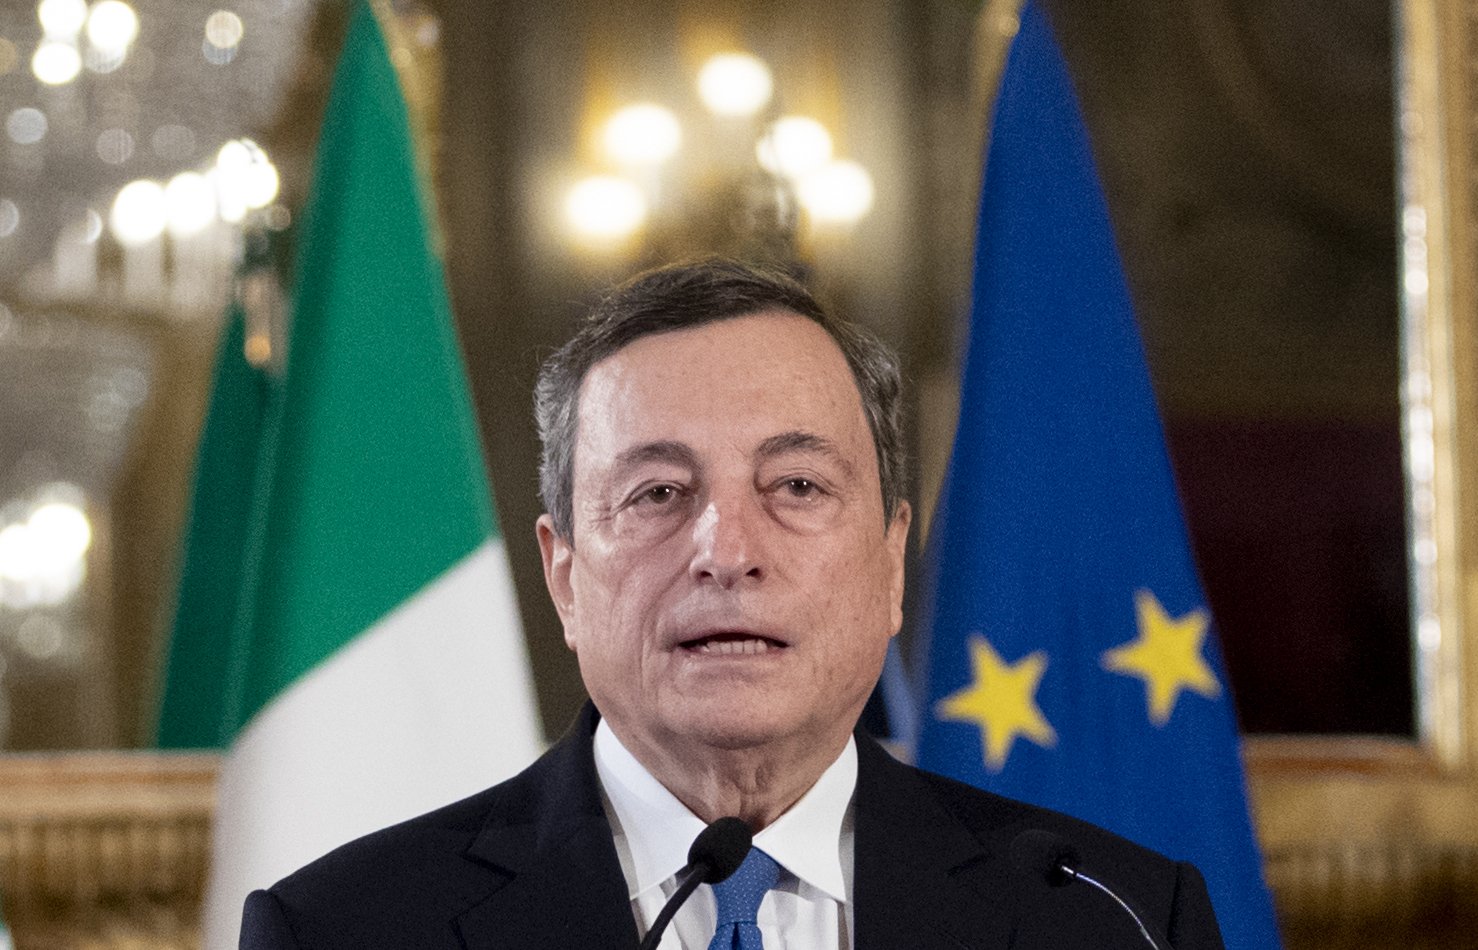 Draghi accepts the formation of the new Italian government